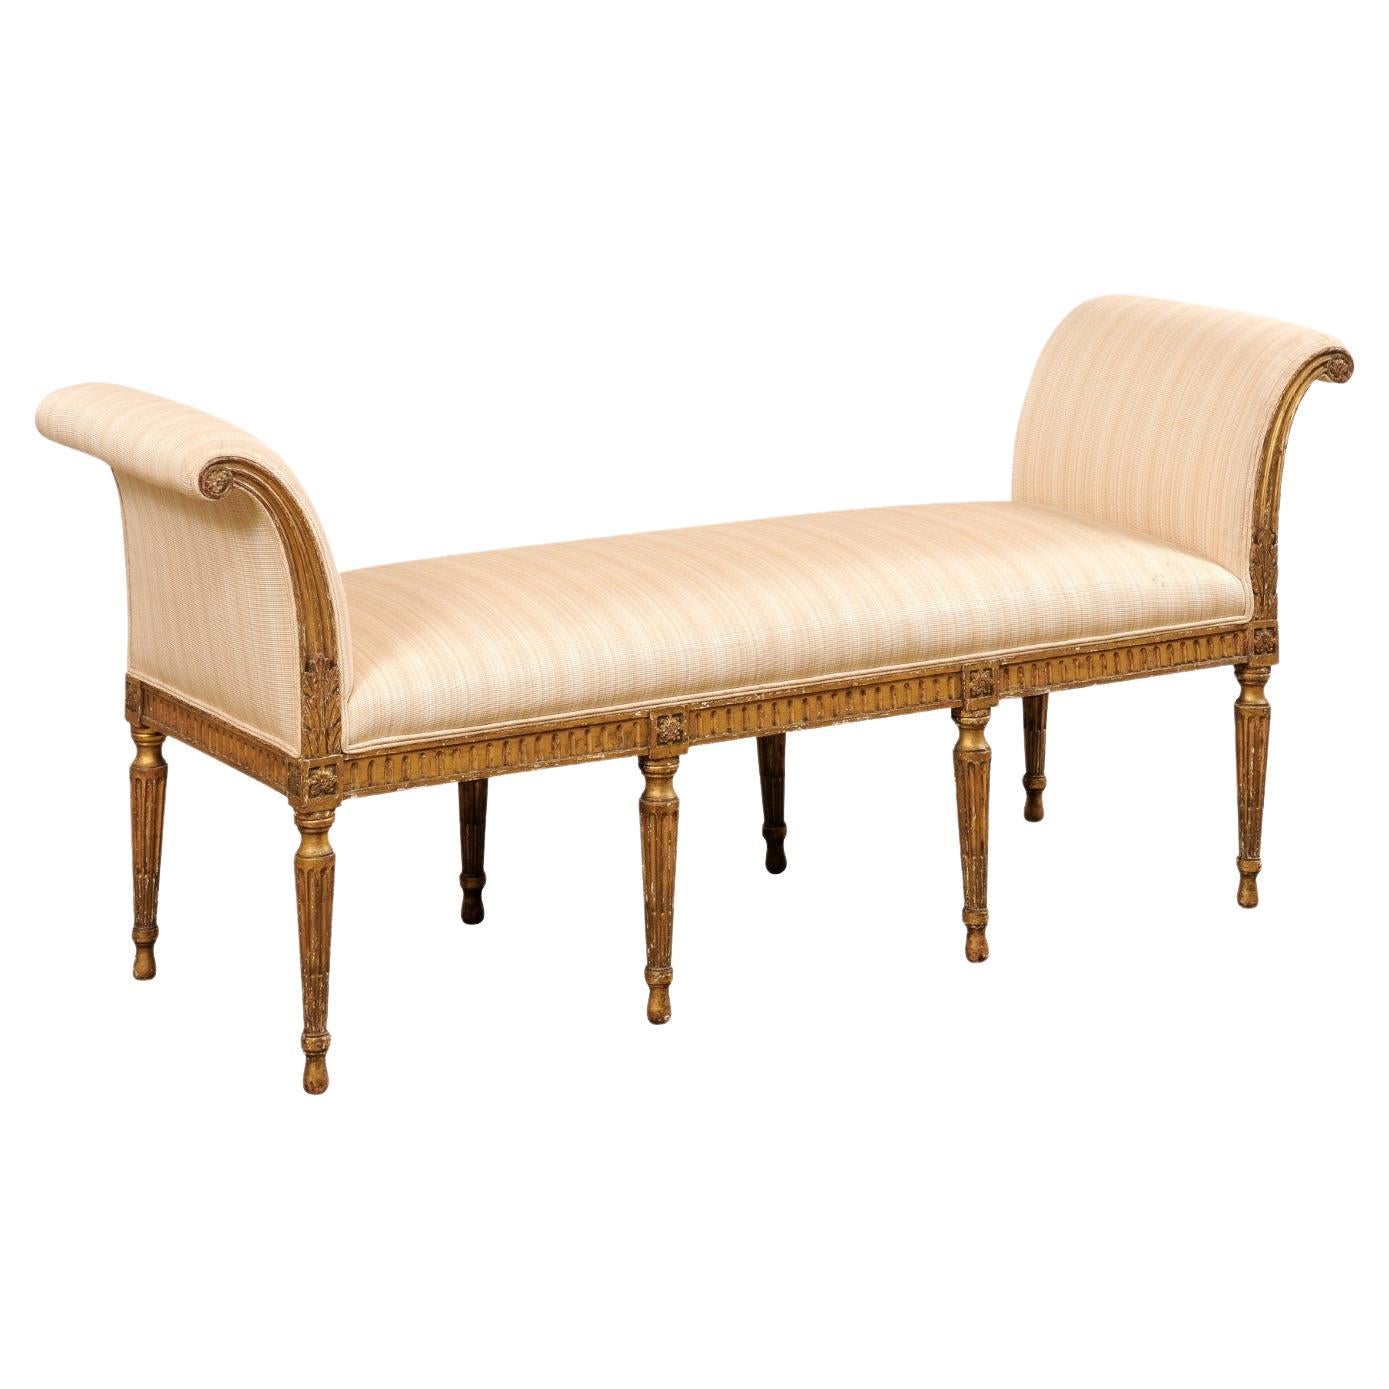 French Louis XVI Style Scroll Arm Window Bench, Late 19th Century